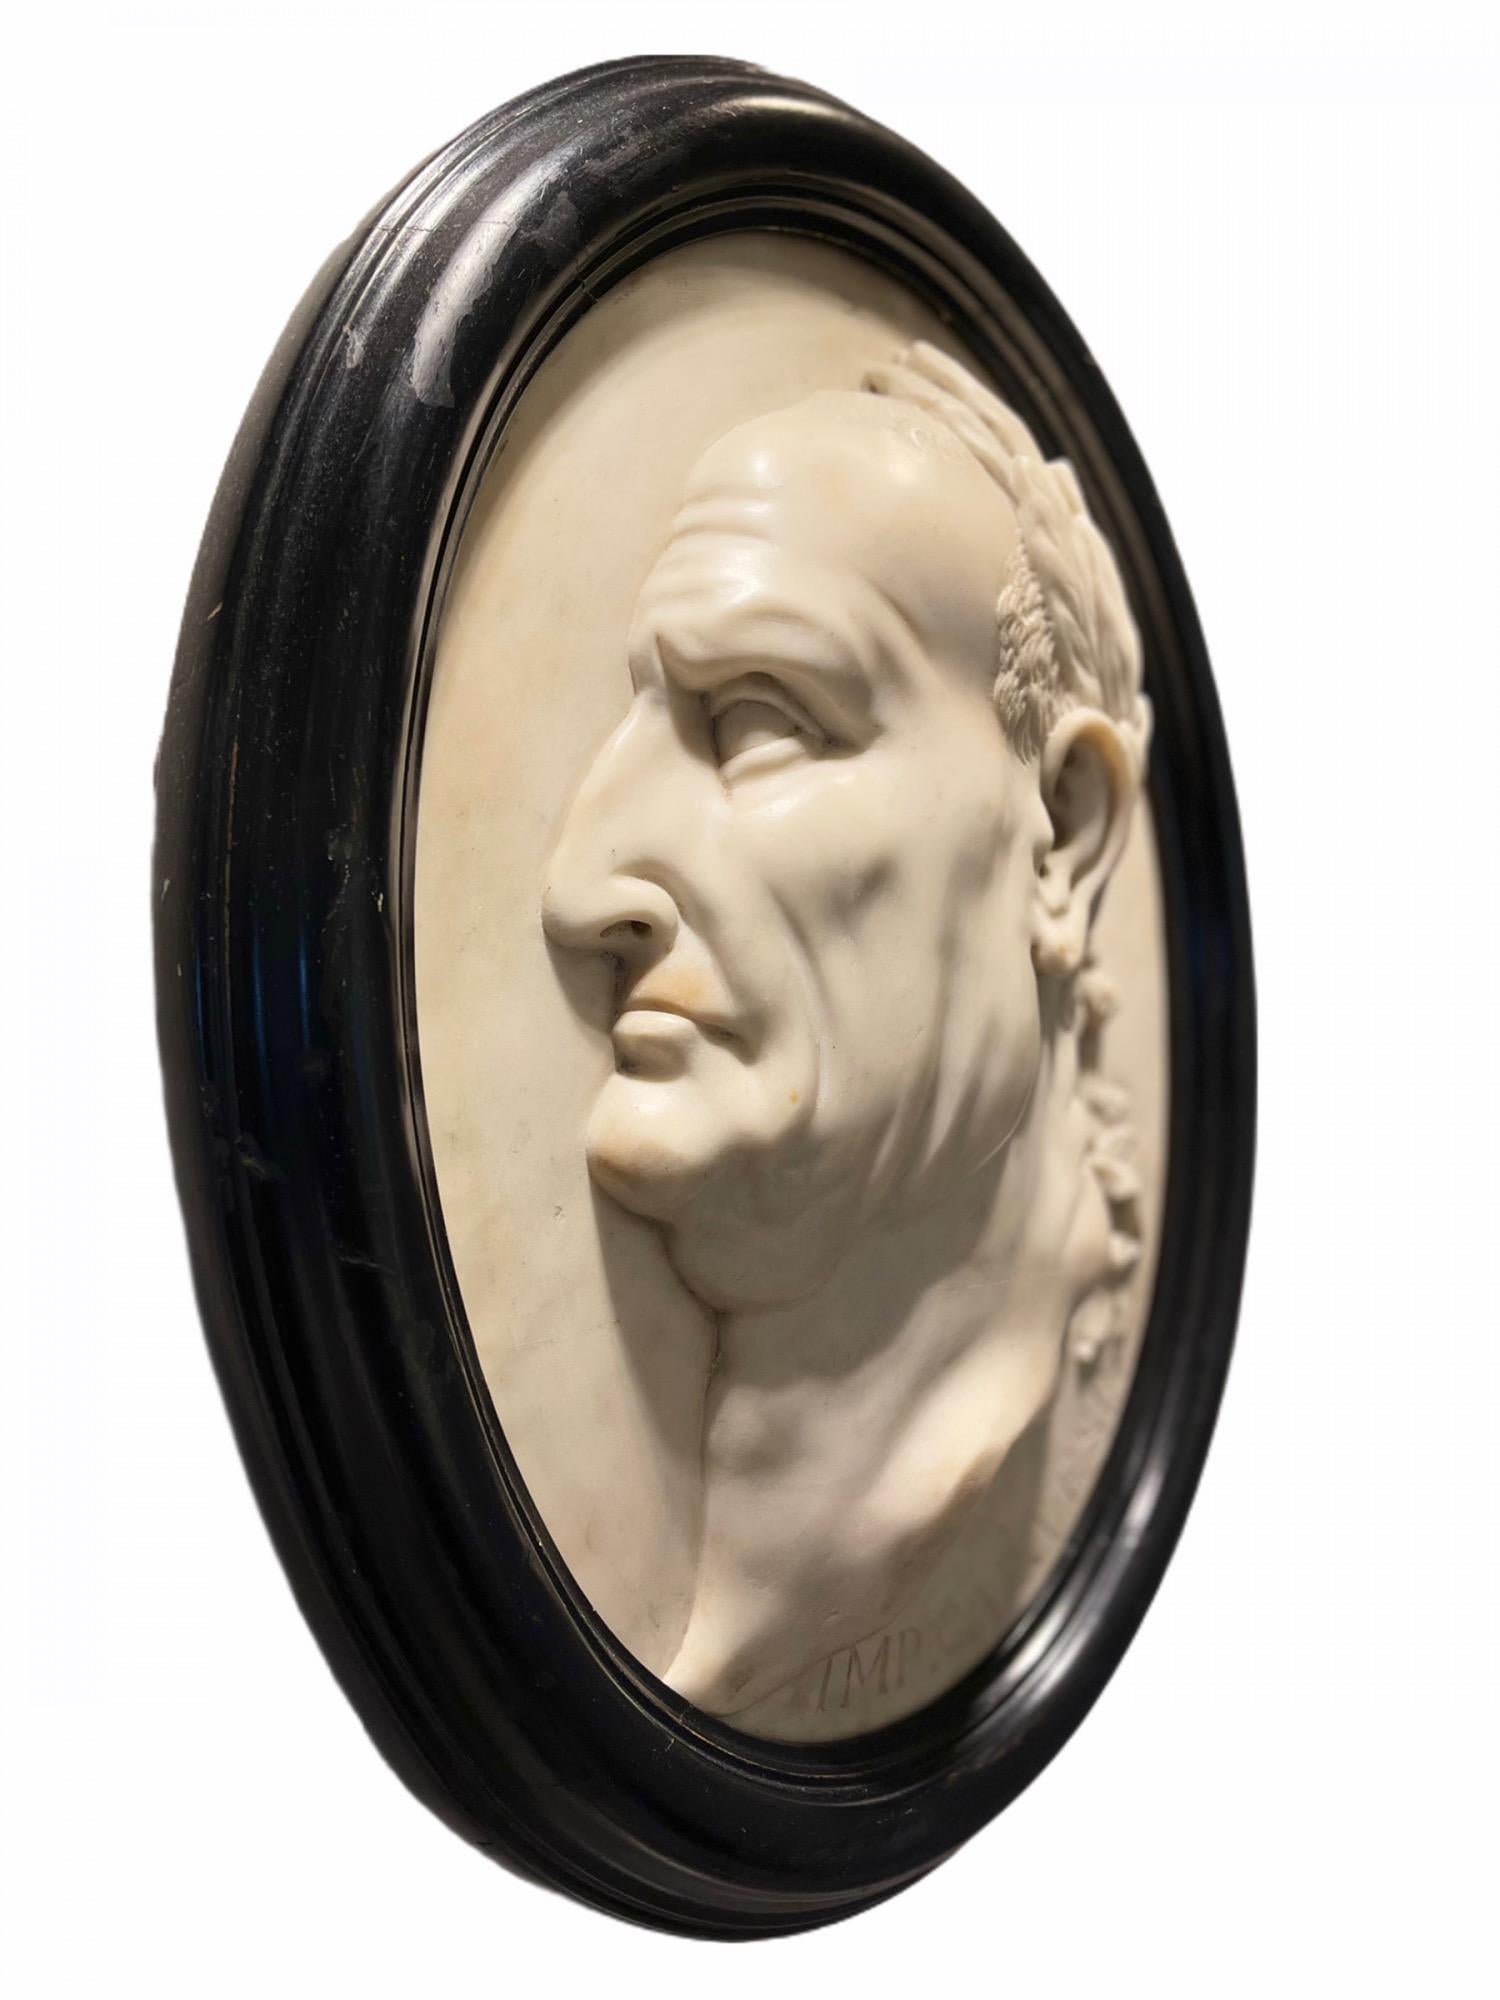 This finely Late 18th Century (Grand Tour Period) modeled portrait relief plaque of the Roman Emperor Caesar Vespasian (9-79 AD) is carved from carrara marble. Vespasian founded the Flavian Dynasty which ruled the Roman Empire for 27 years. Under